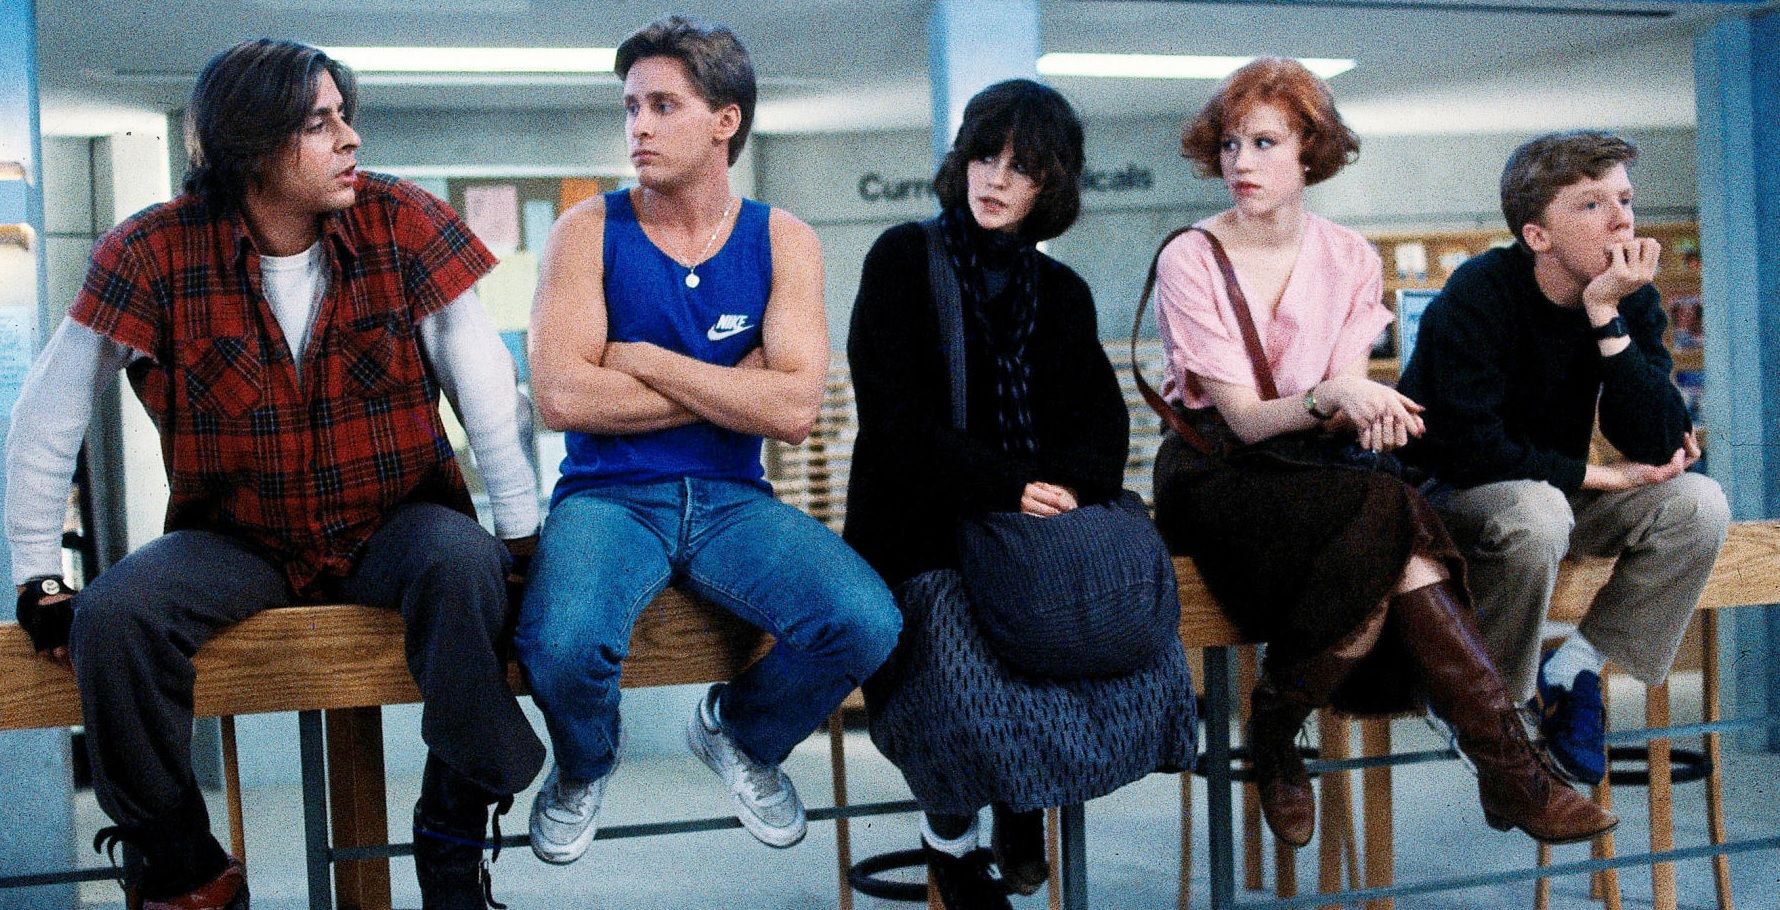 The Breakfast Club cast in detention